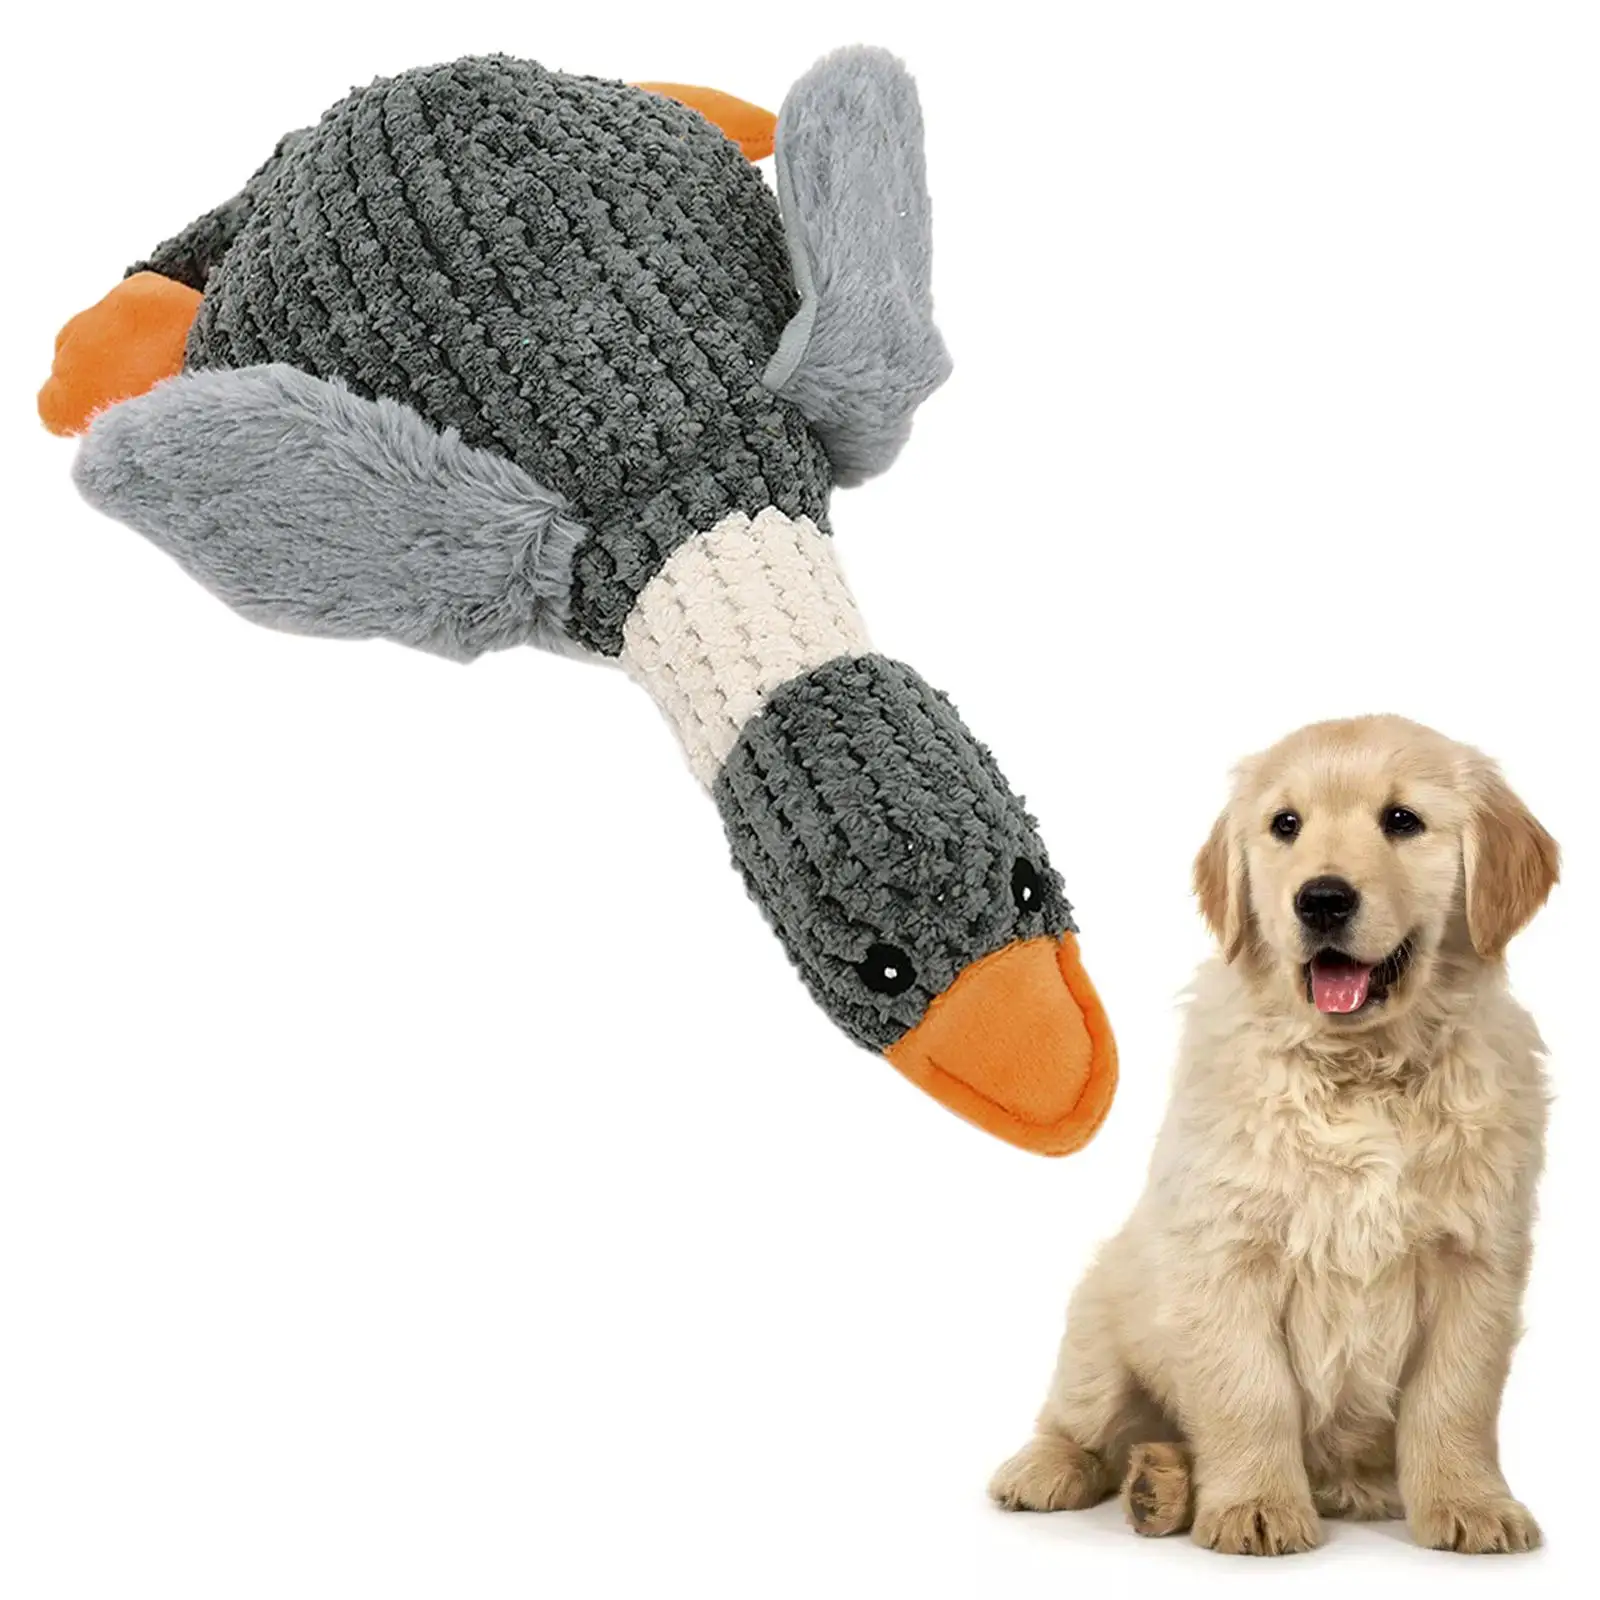 Pet Dog Toys Cleaning Tooth with Squeaky Stuffed Bite Toy Interactive Chew Toys Plush for Large Small Medium Dogs Doggie Puppy